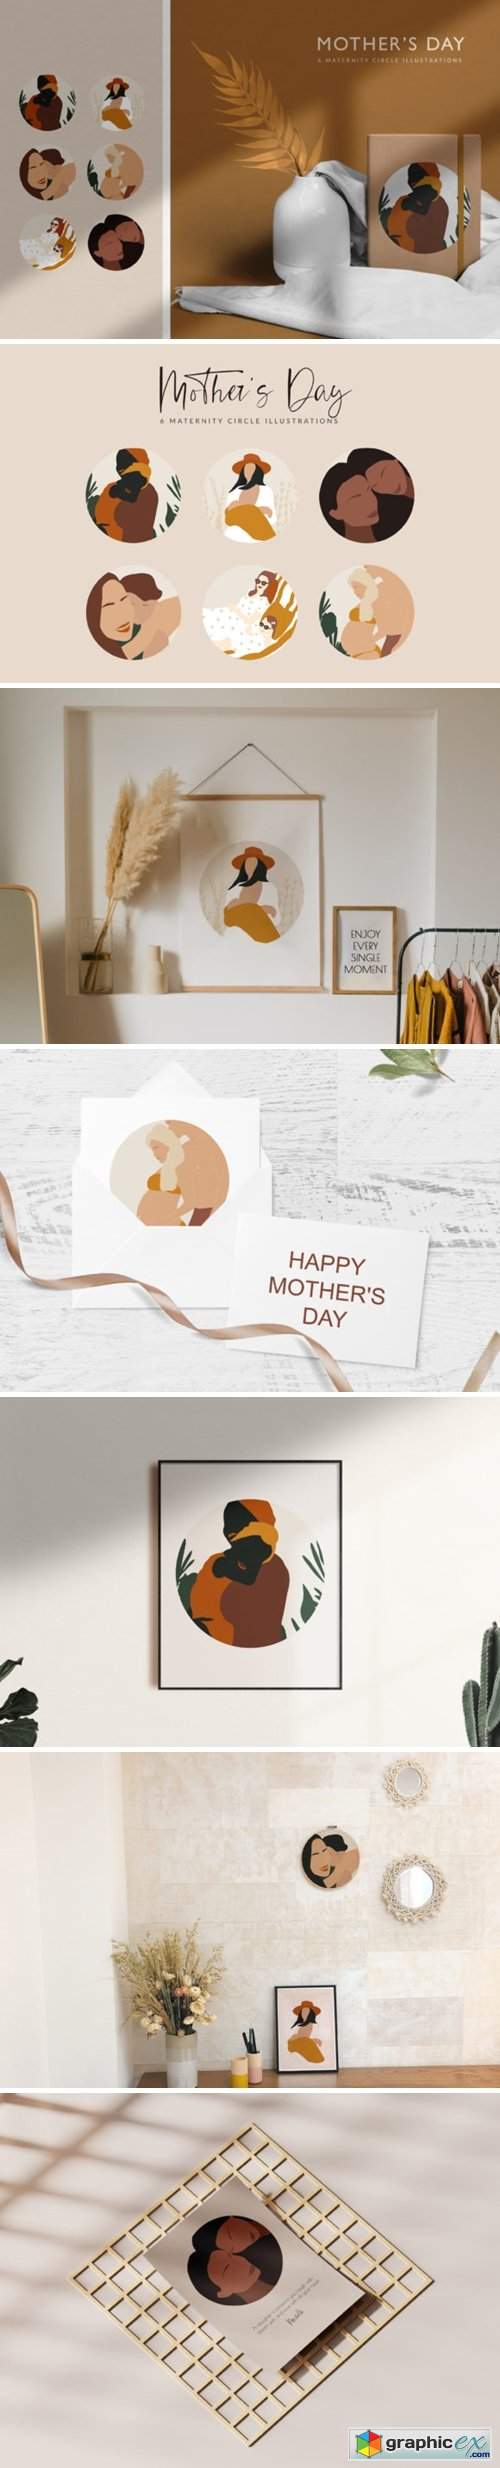  Mother's Day Illustrations 